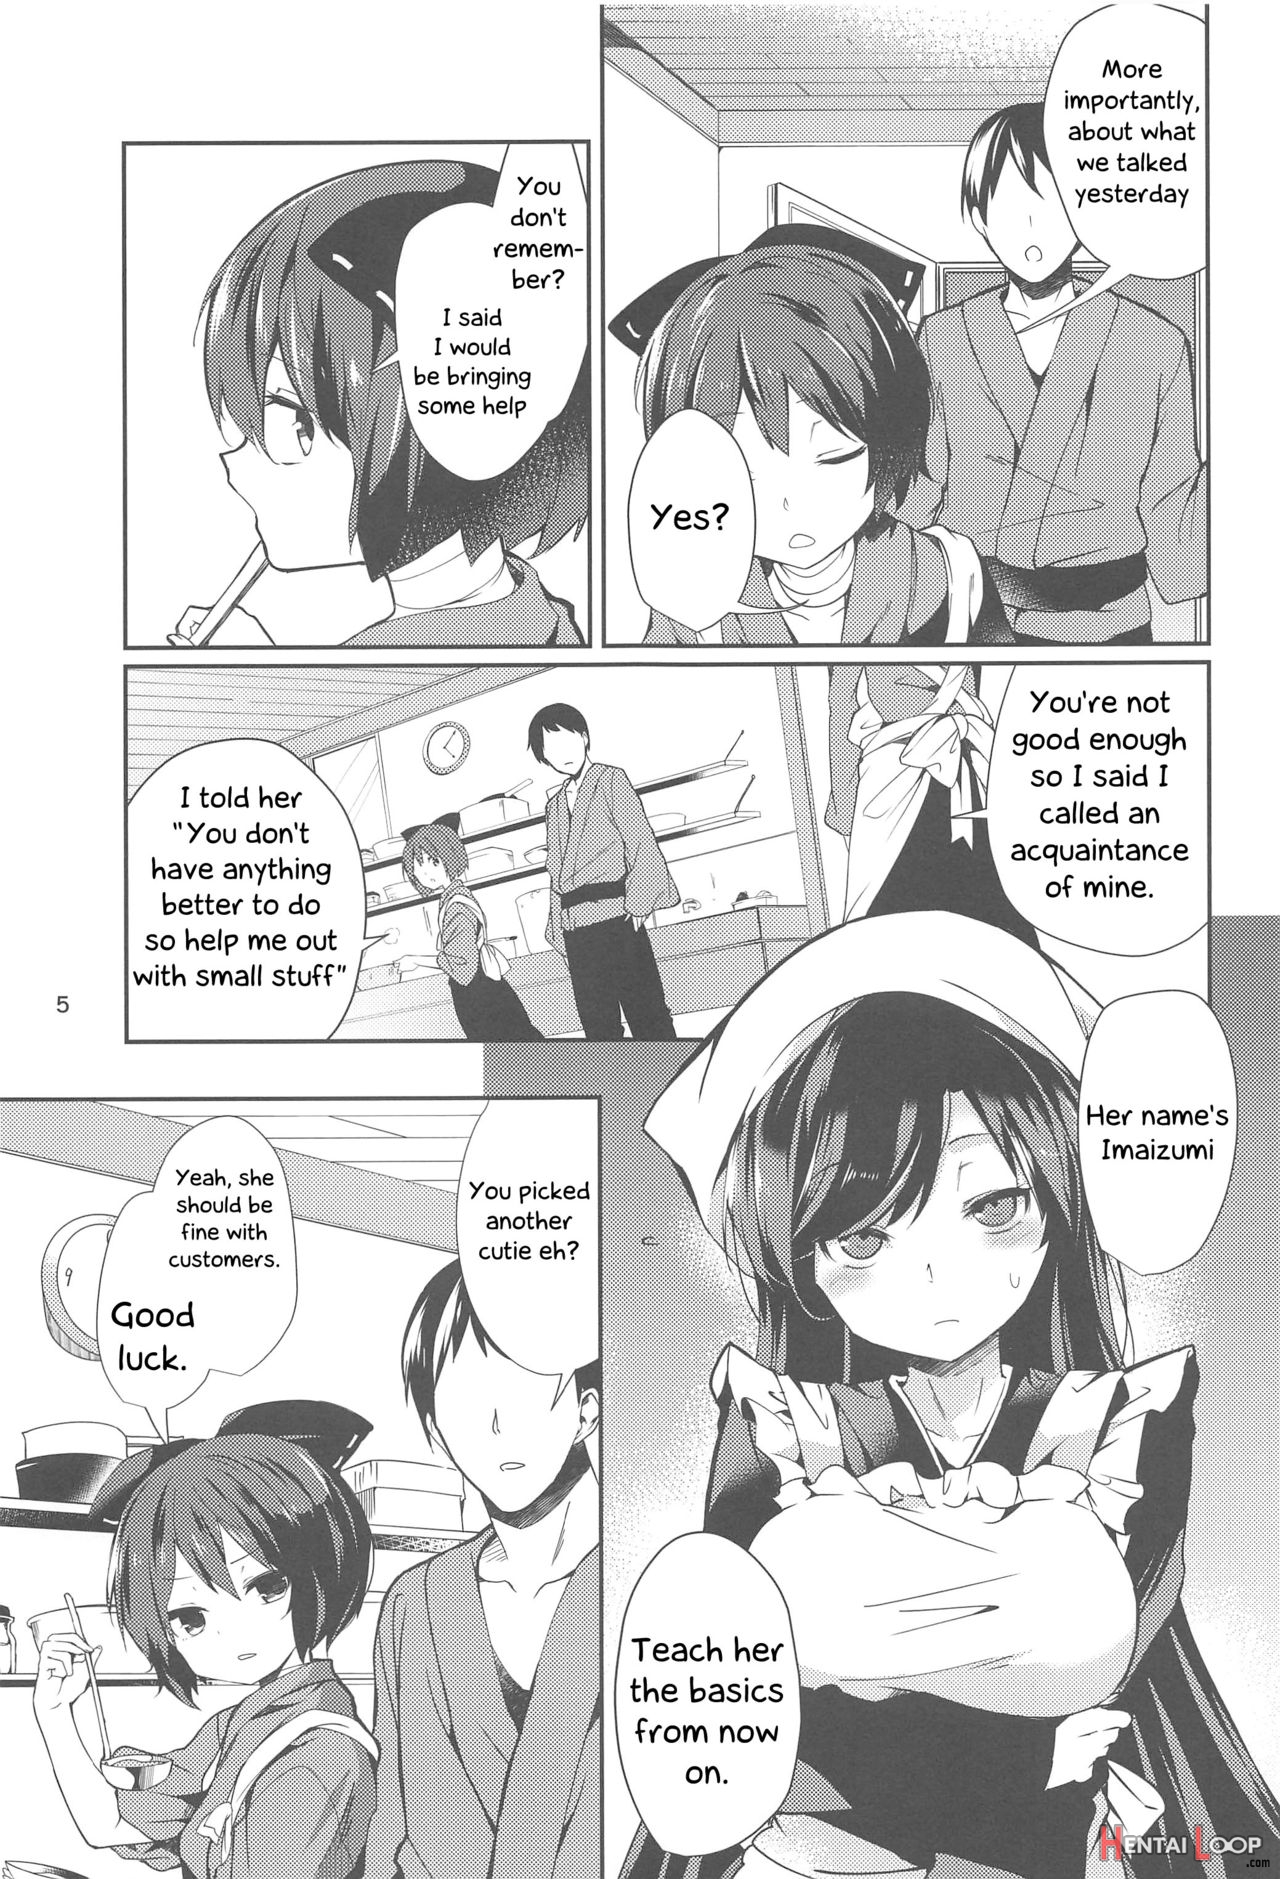 Kagerou's Human Exposure Record page 4